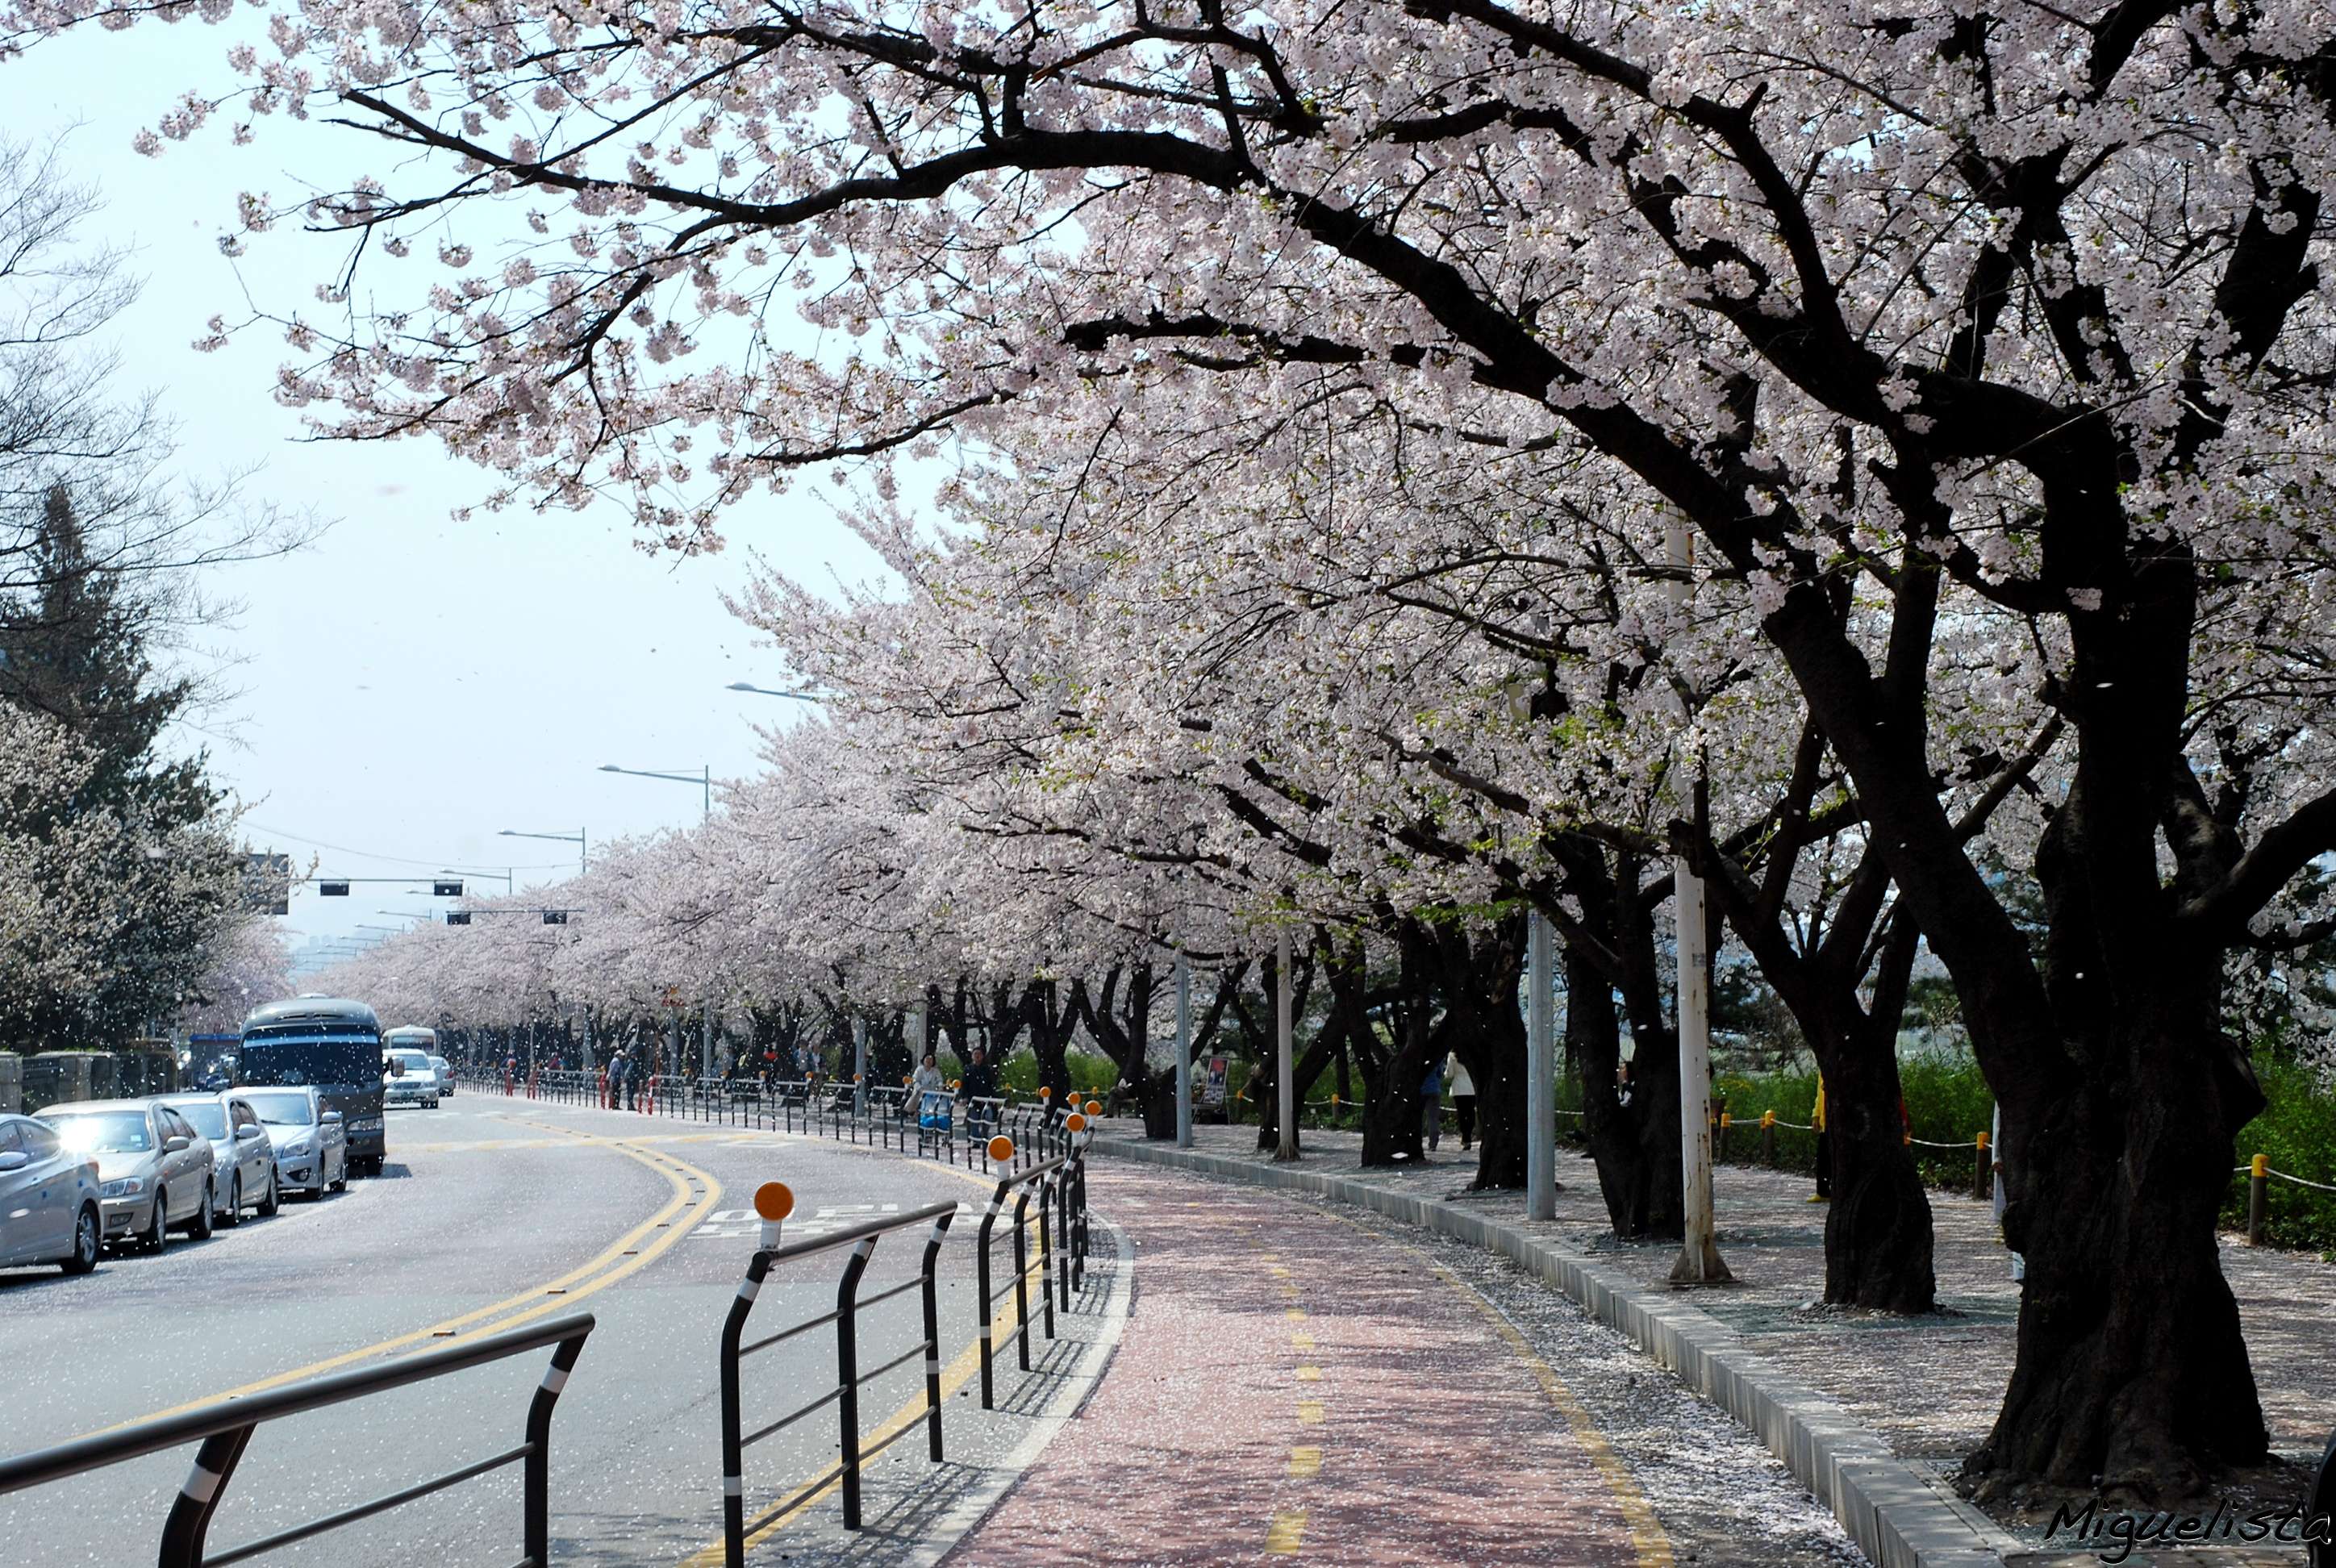 Cherry blossoms in Seoul